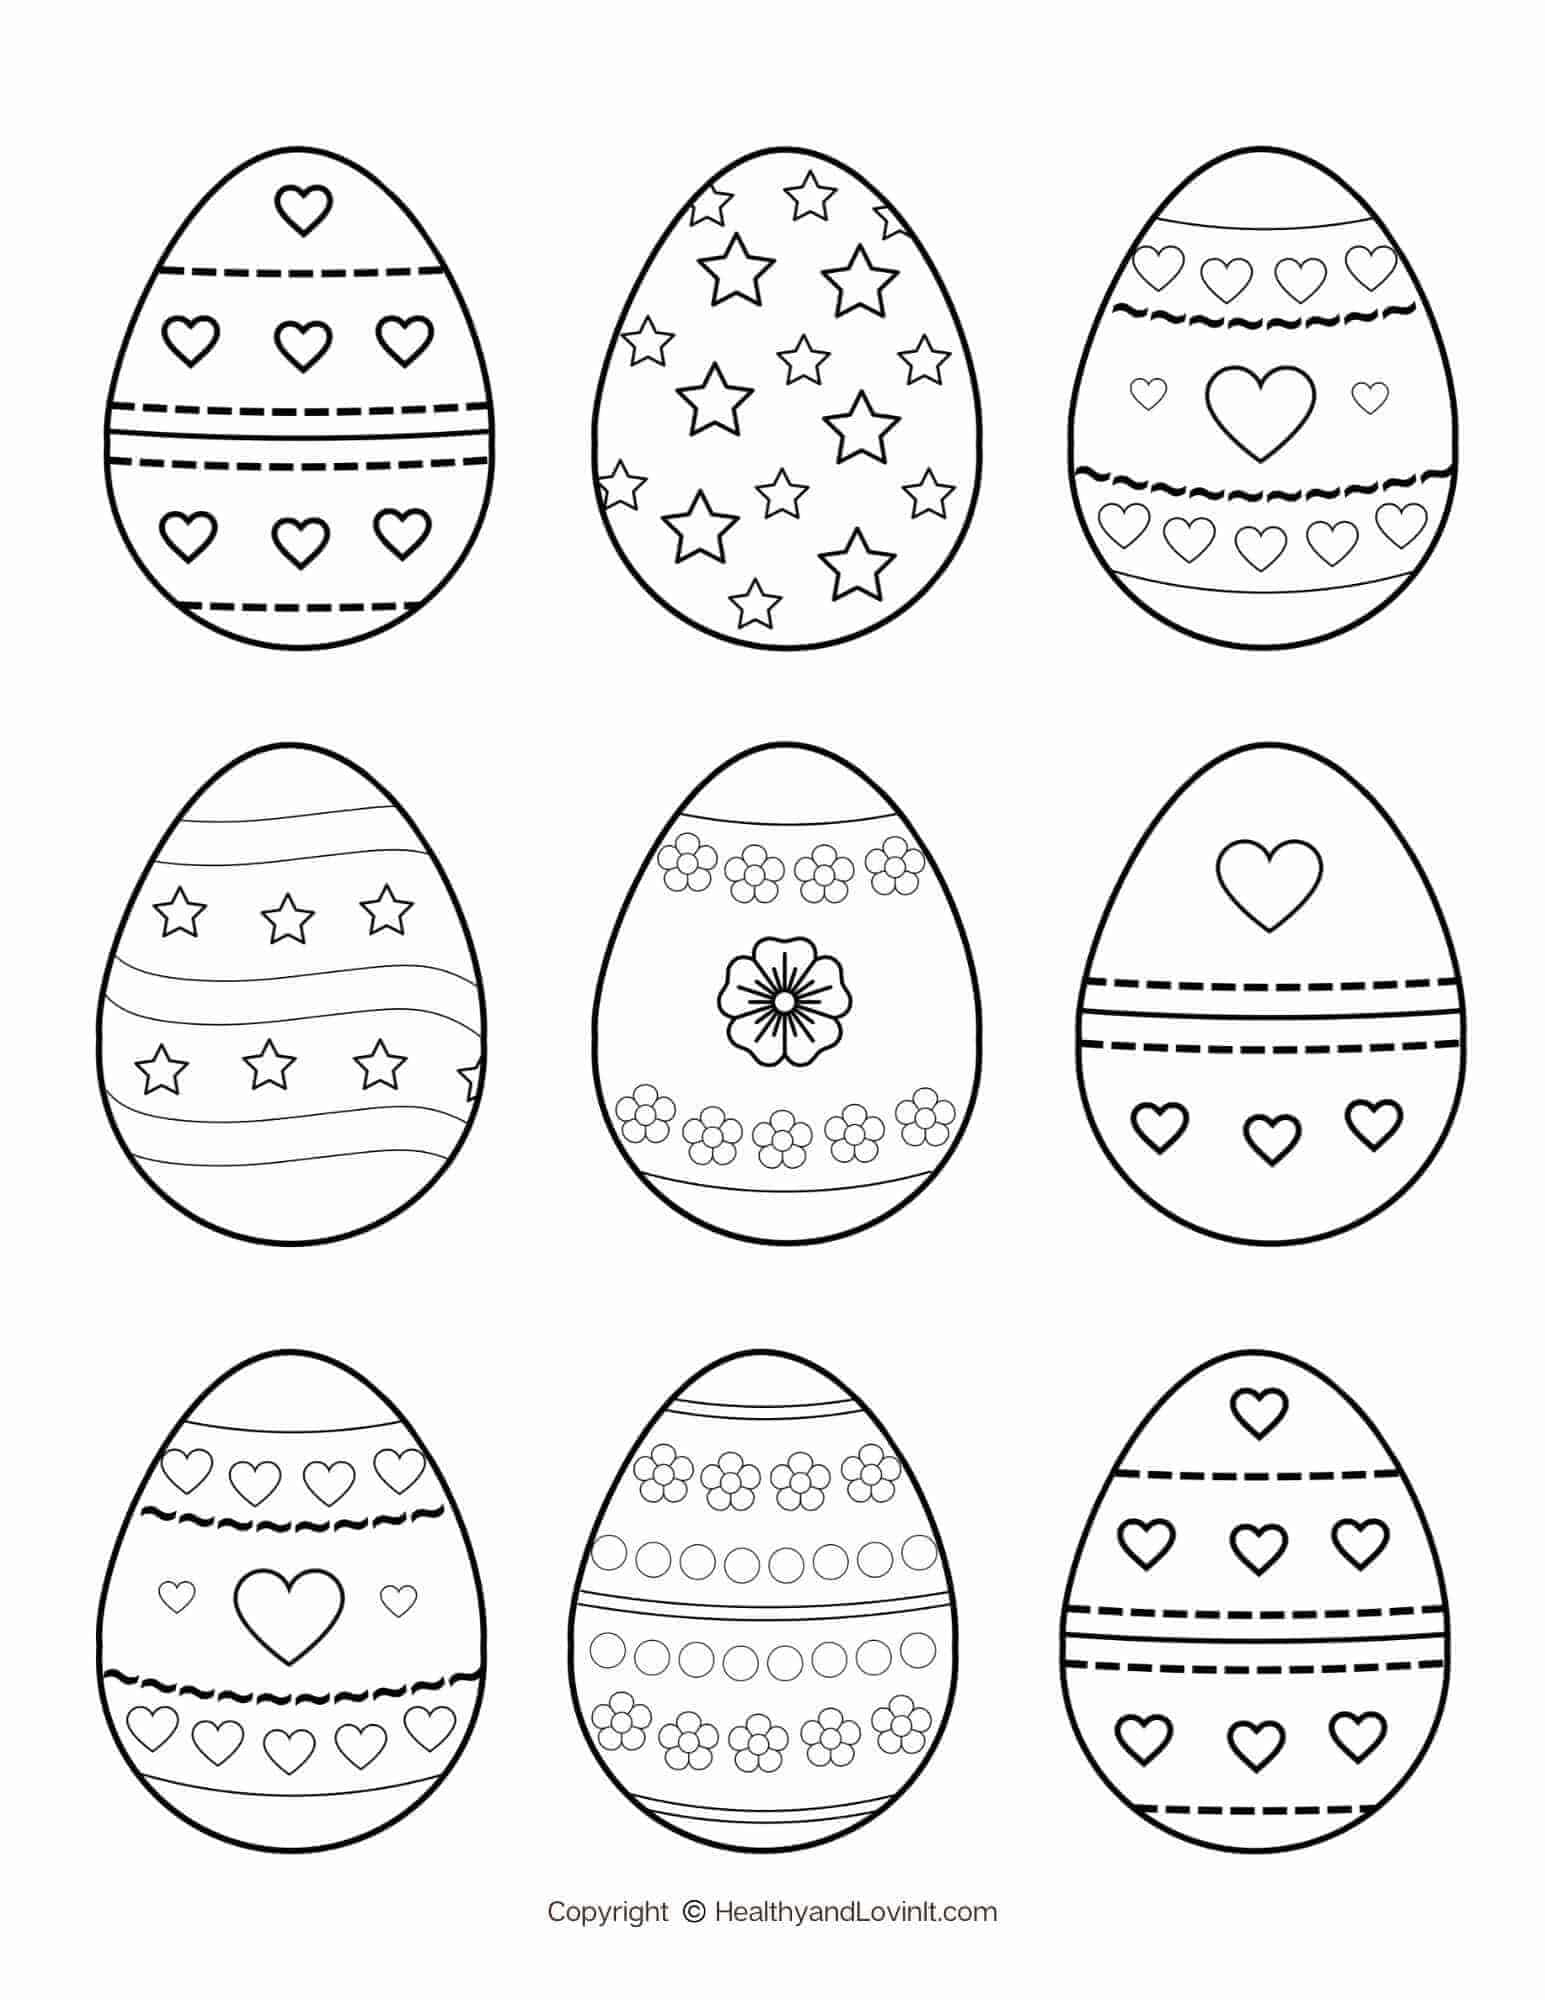 Easter Egg Coloring Pages and Templates (Fun for Kids and Adults!)